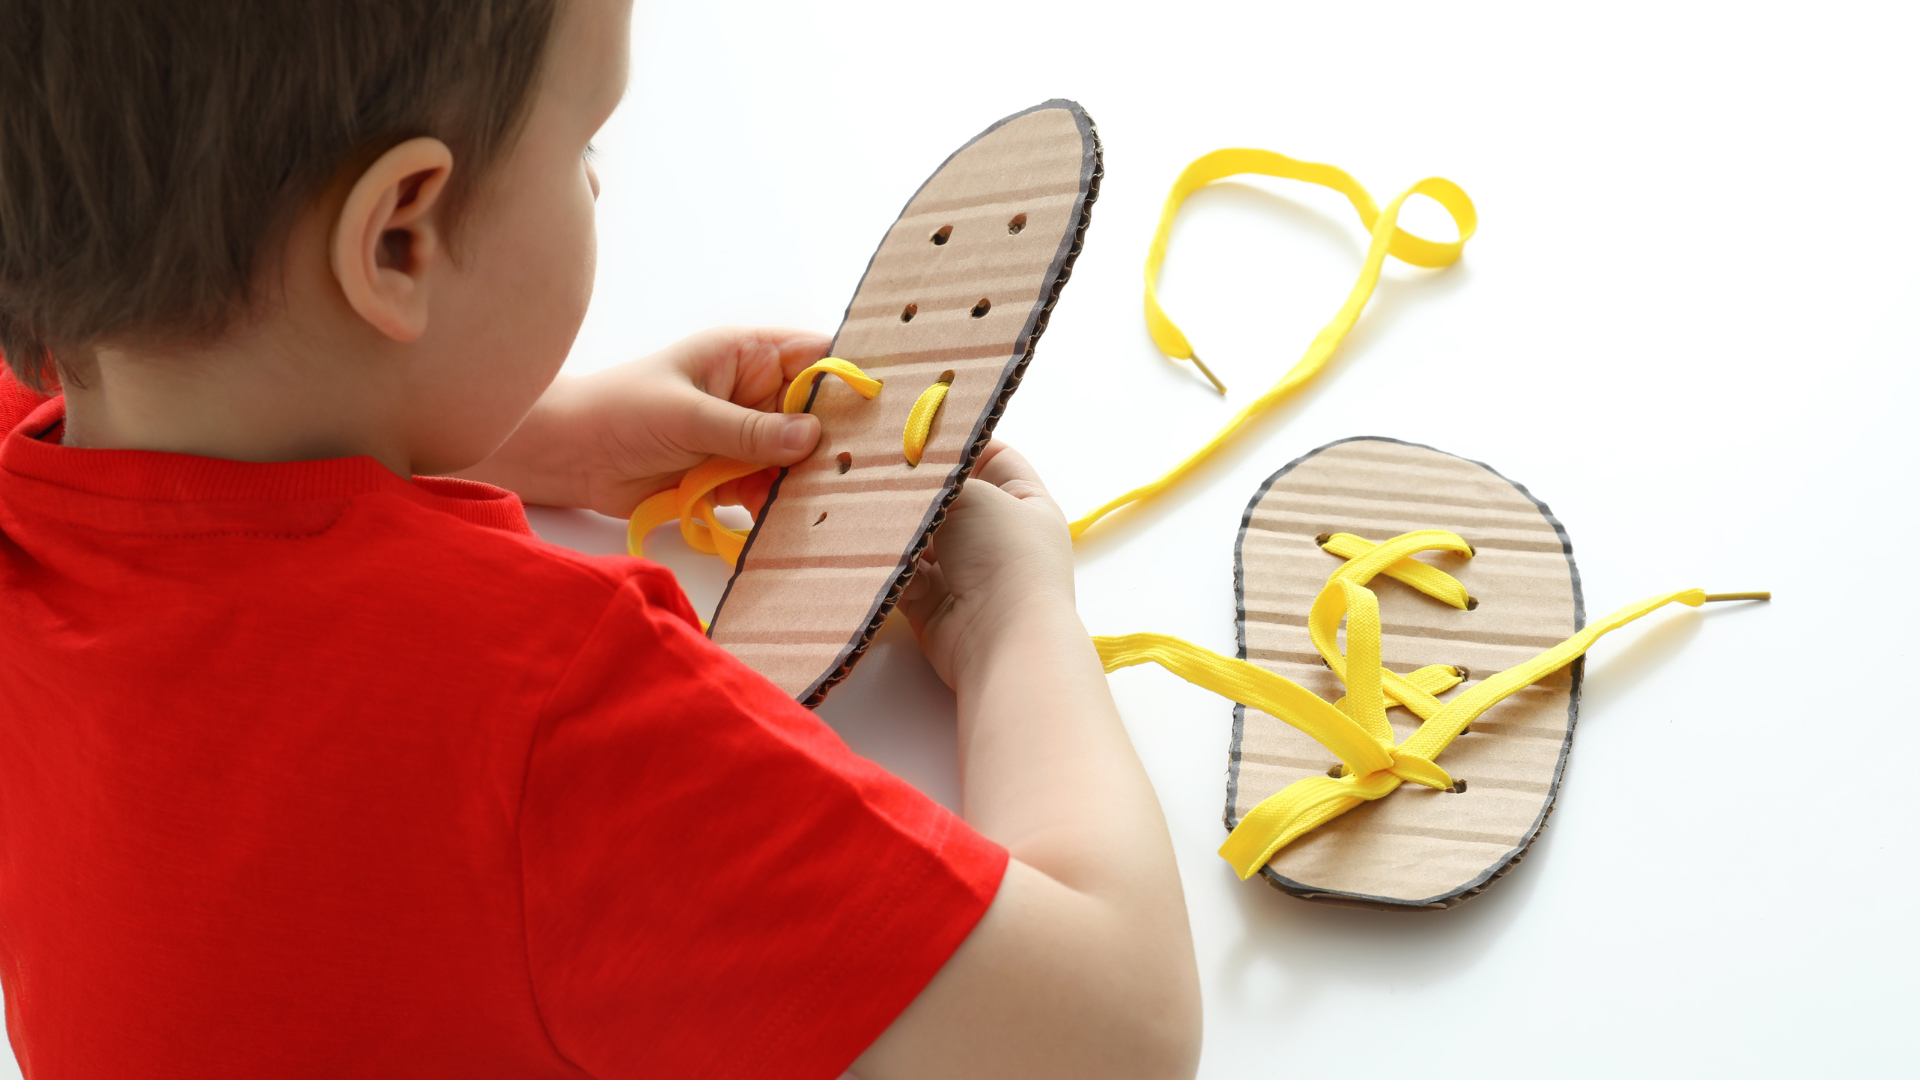 Handmade Wooden Toy Design Ideas For Cognitive Development Of Toddlers